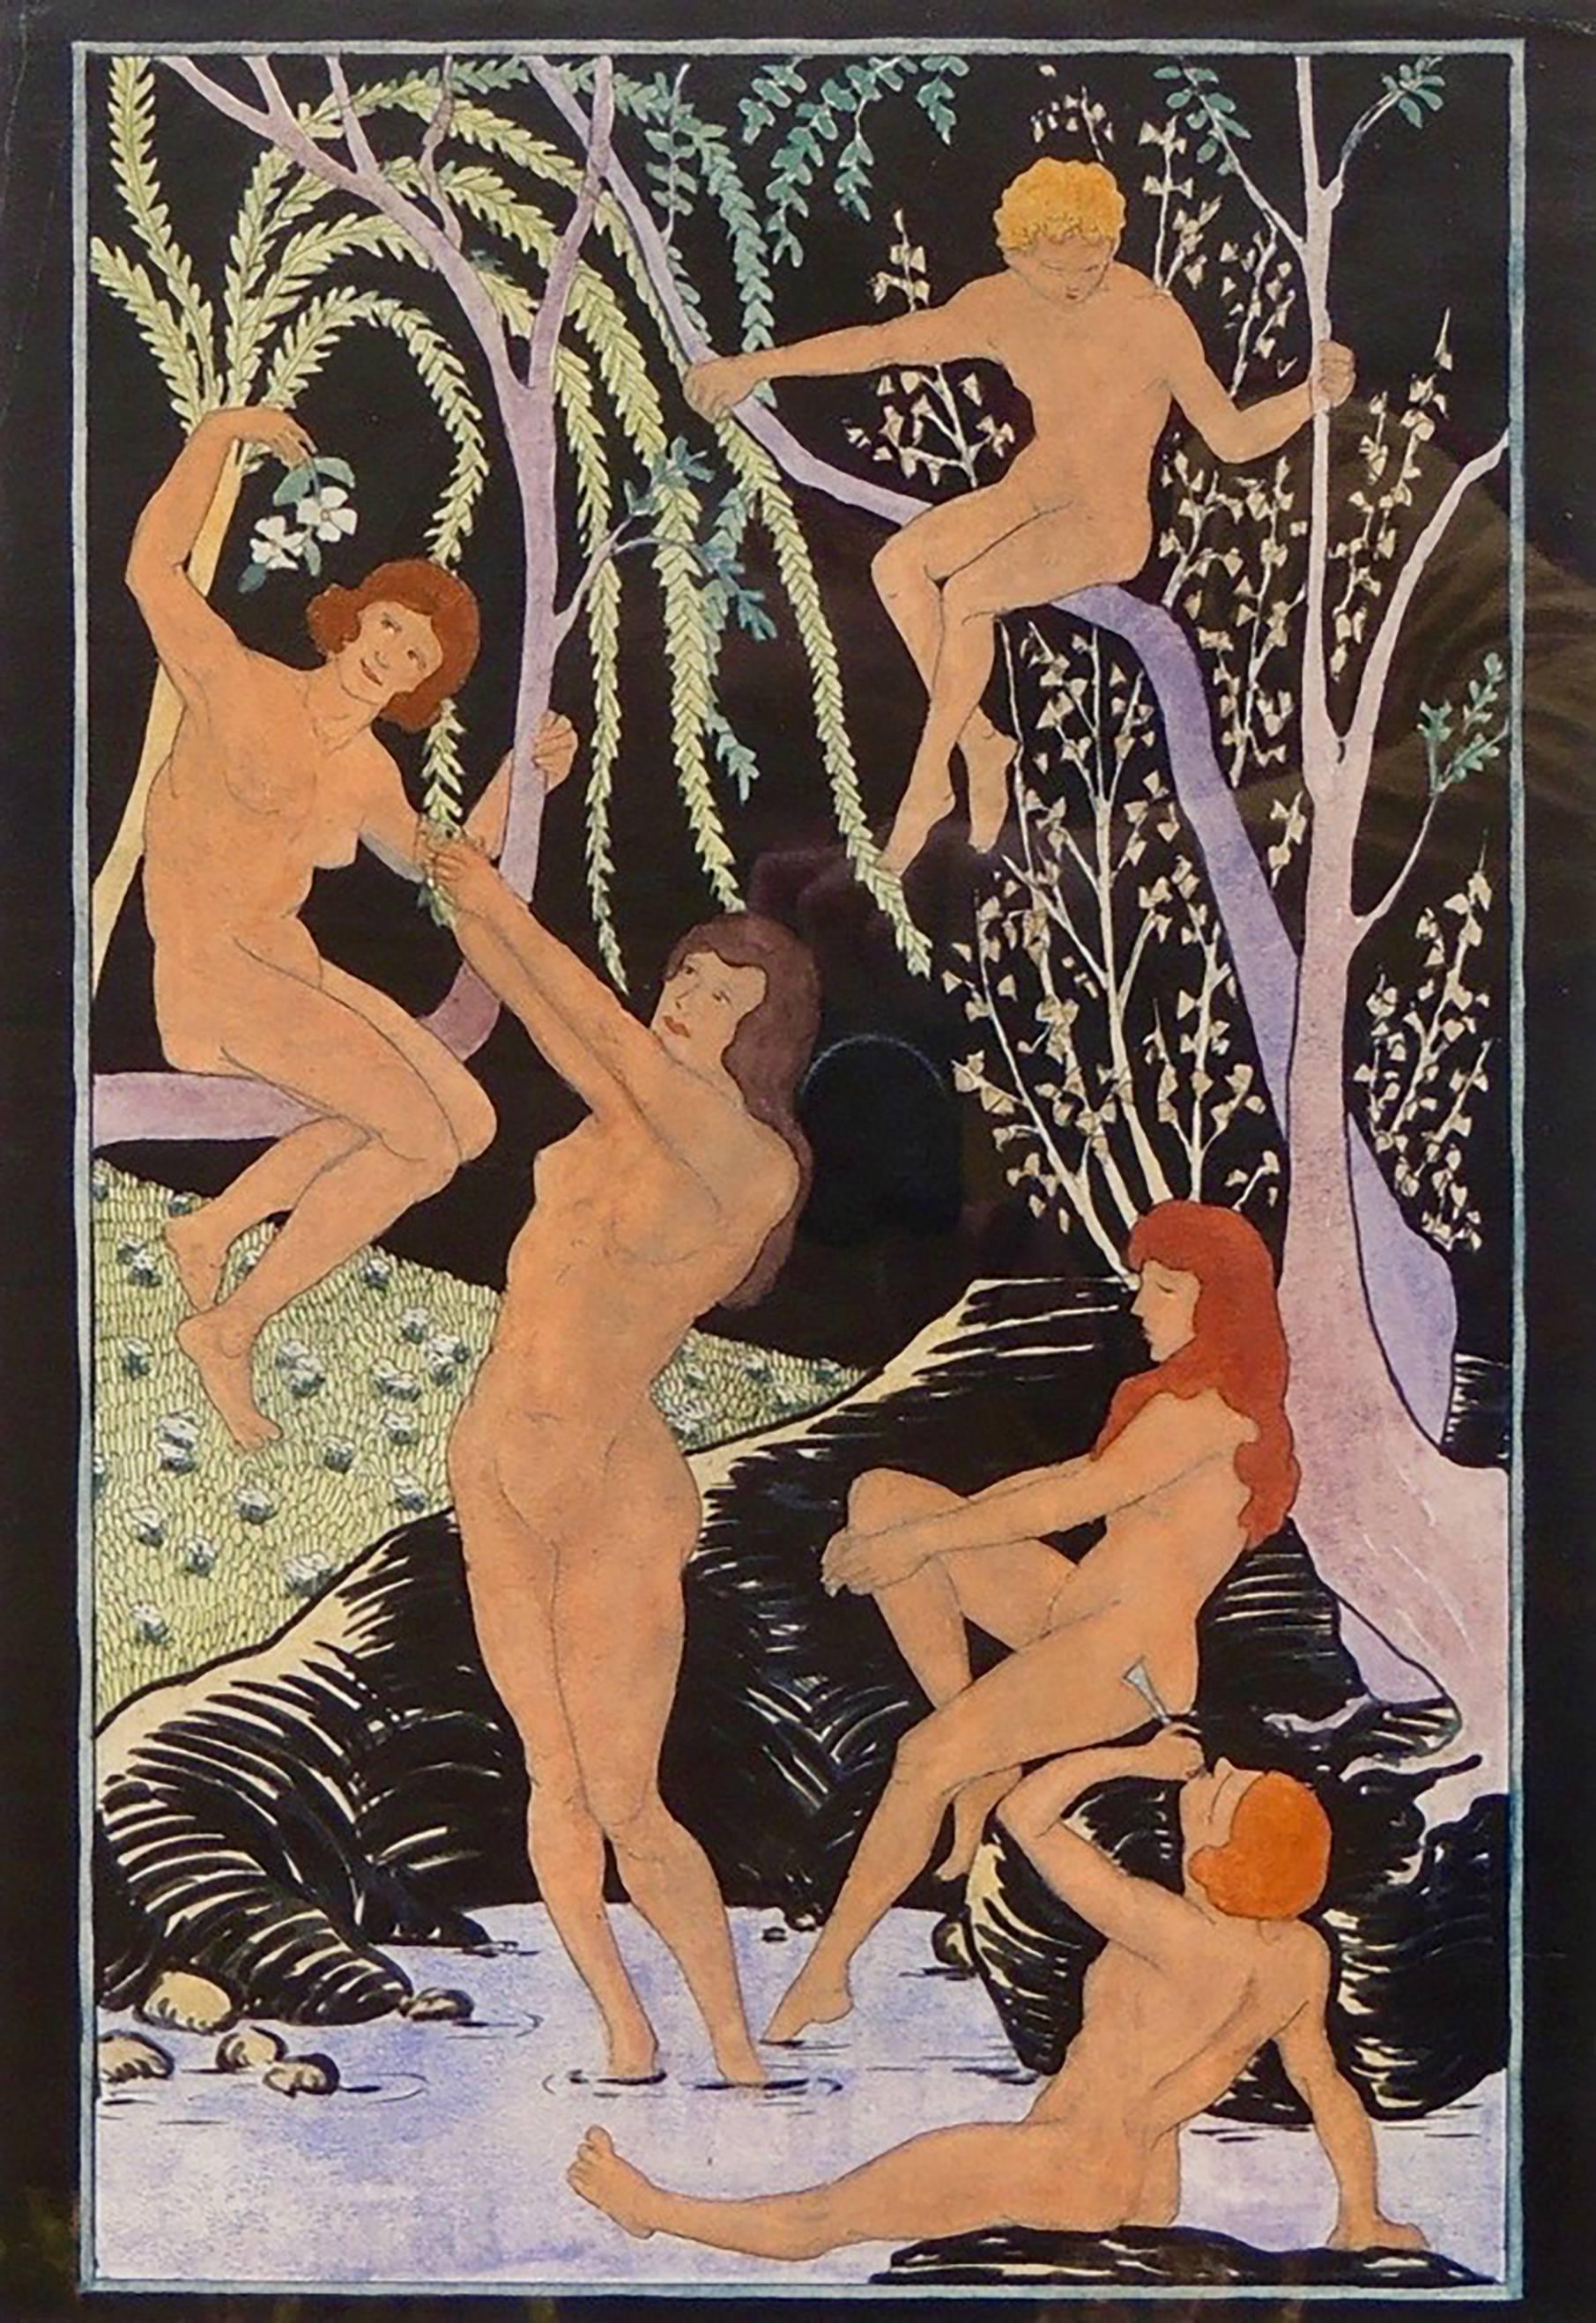 Nature Scene with Nudes - Art by Susan Flint